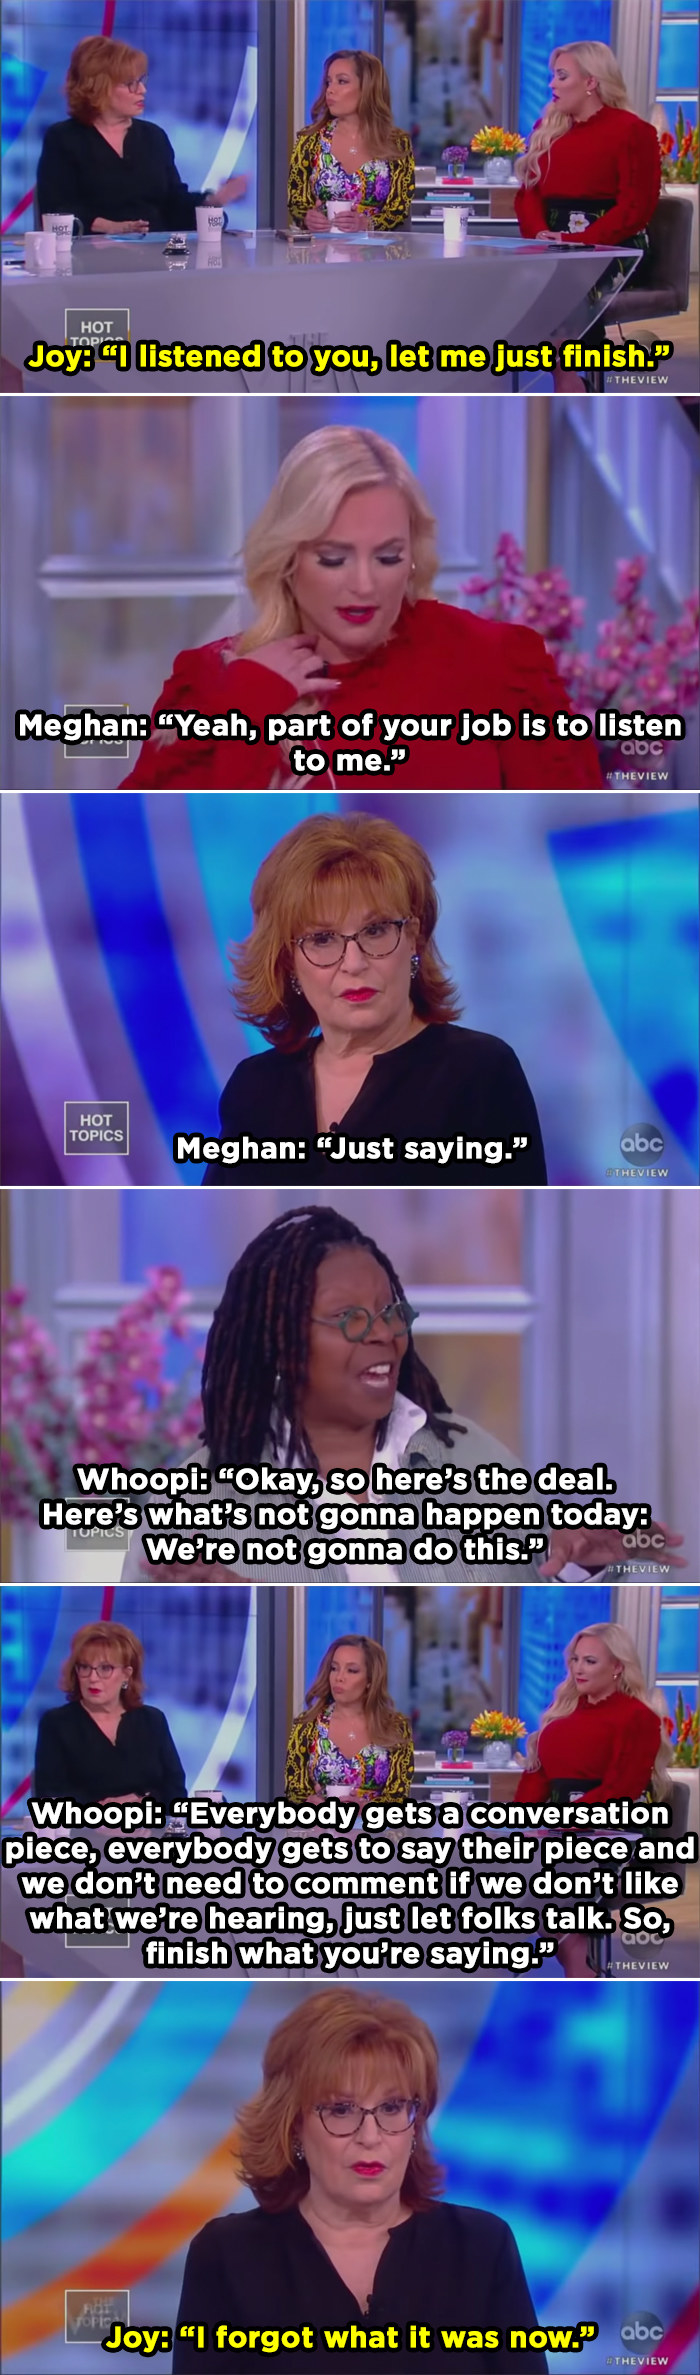 Meghan McCain cutting off Joy to tell her to listen to her, then Whoopi Goldberg saying everyone has a right to say their piece